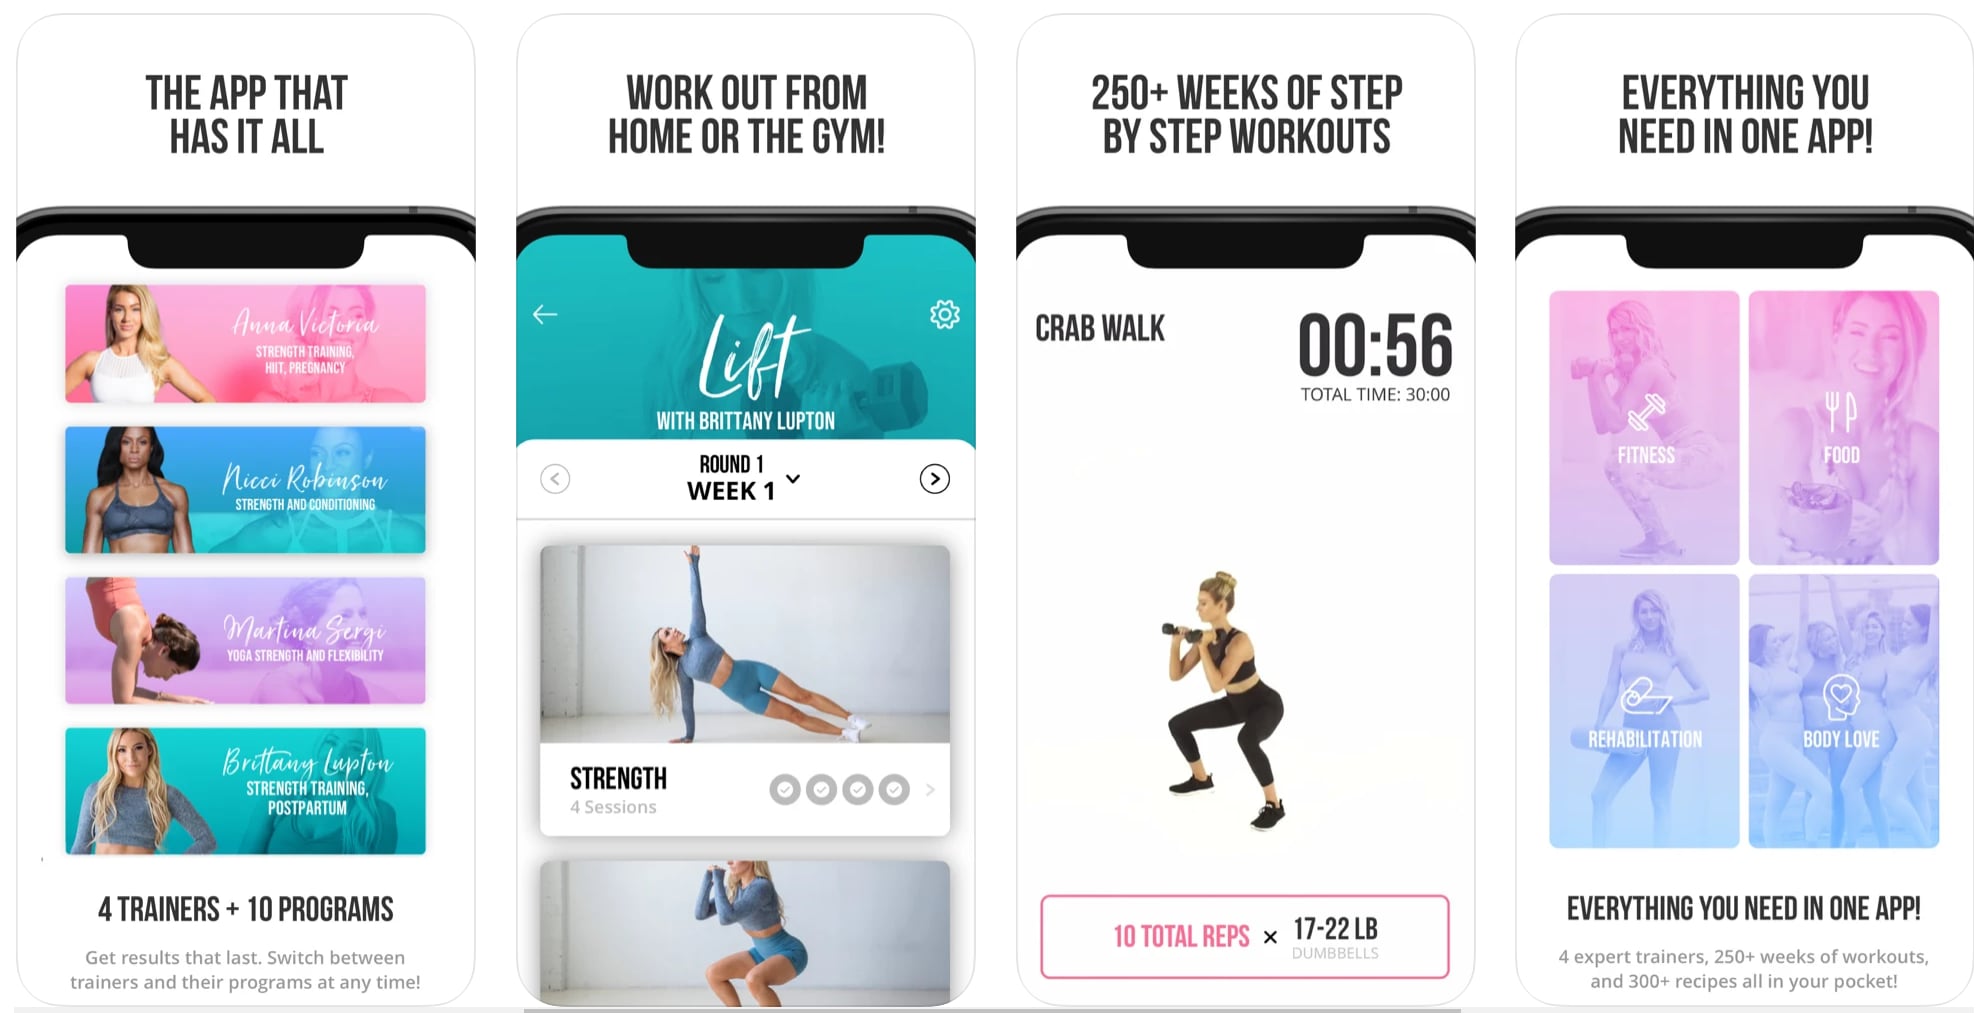 Home Workout Apps - Why Do They Work